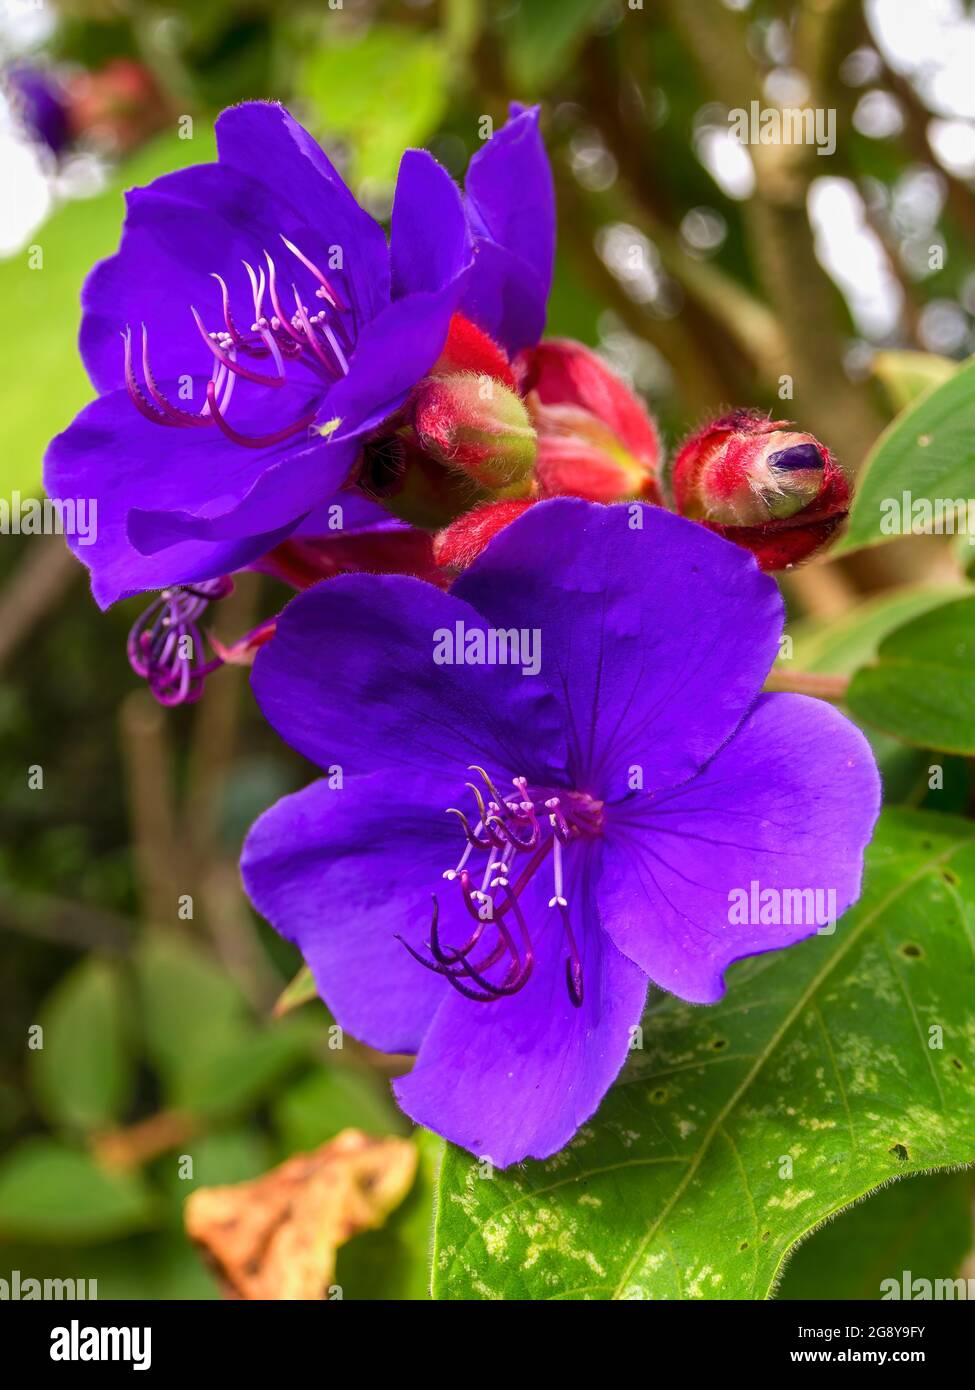 Macro photography of two Andean princes flowers captured at the central Andes of Colombia near the town of Arcabuco, Boyaca. Stock Photo